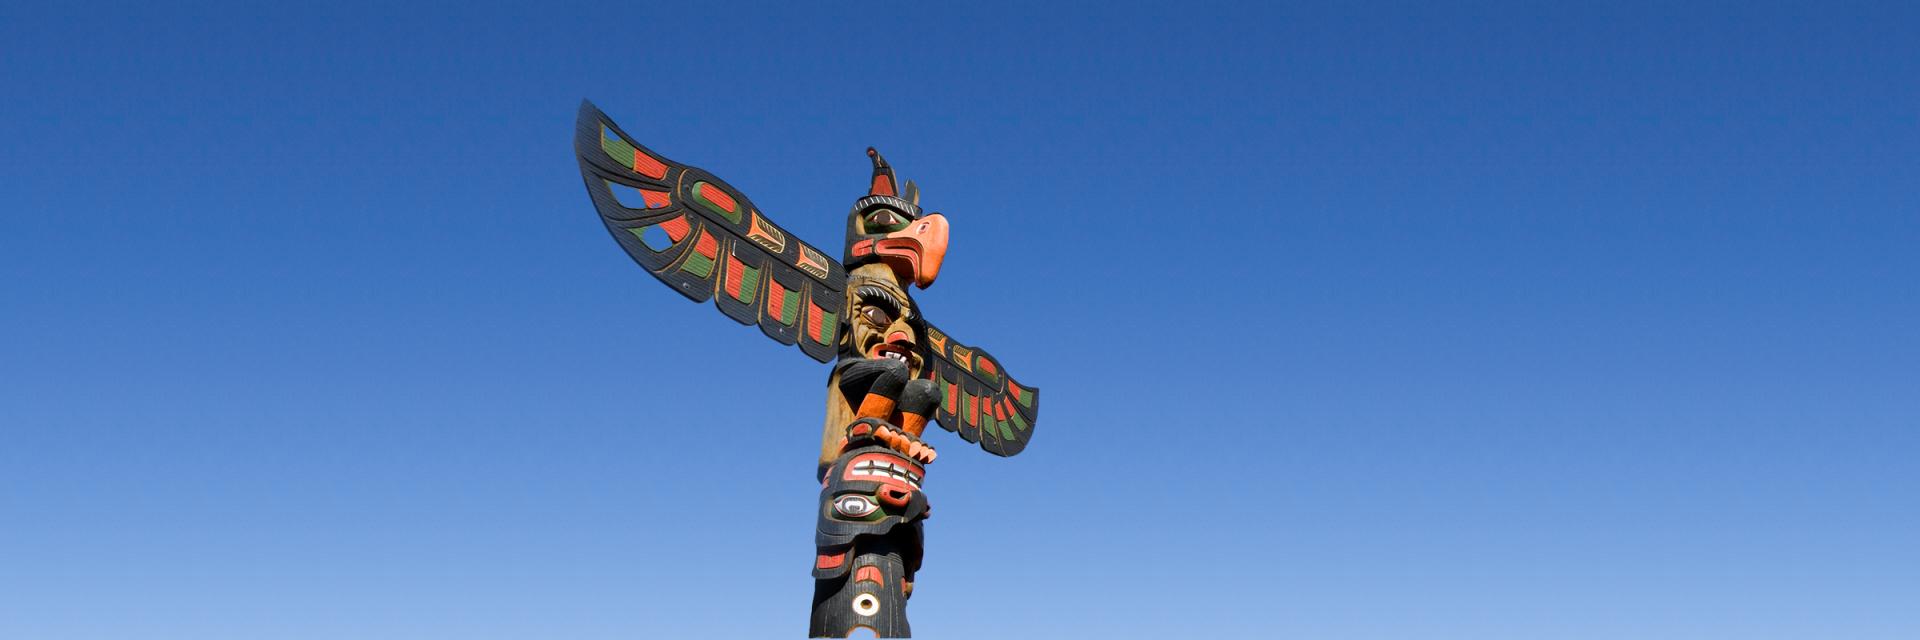 A beautiful Pacific Northwest tribal totem pole with expanded wings in front of a clear, blue sky.